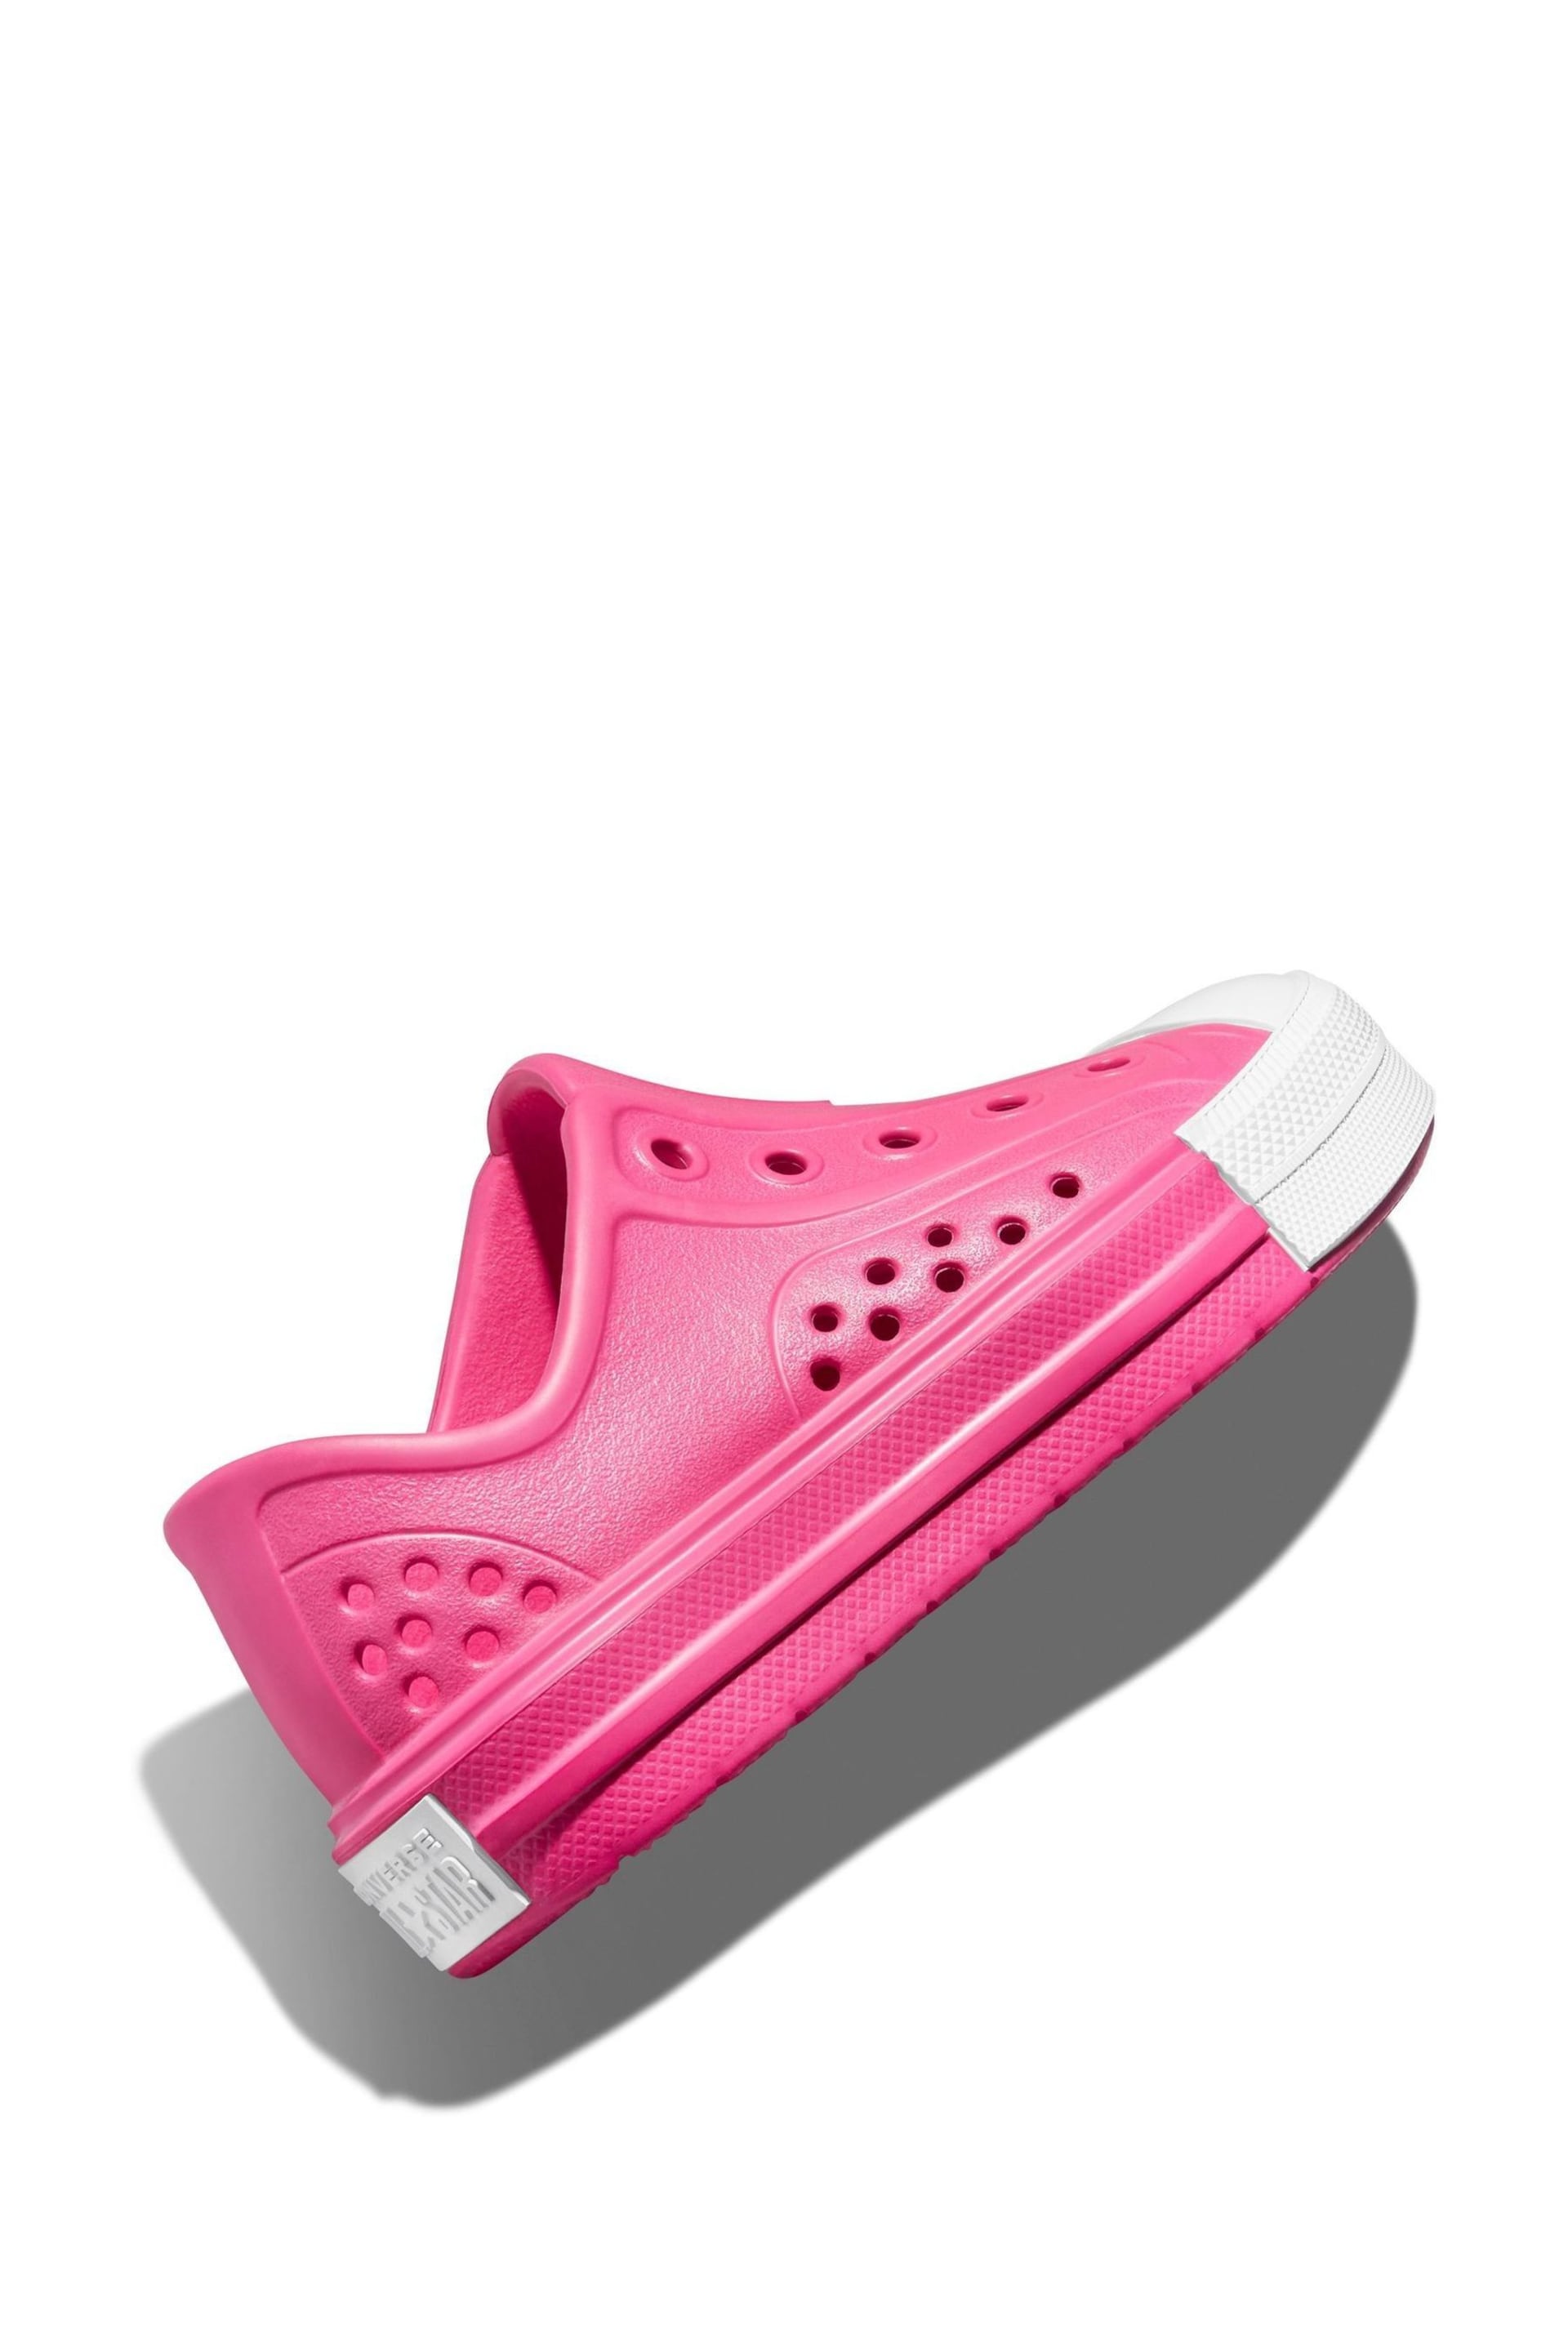 Converse Pink Play Lite Toddler Sandals - Image 7 of 8